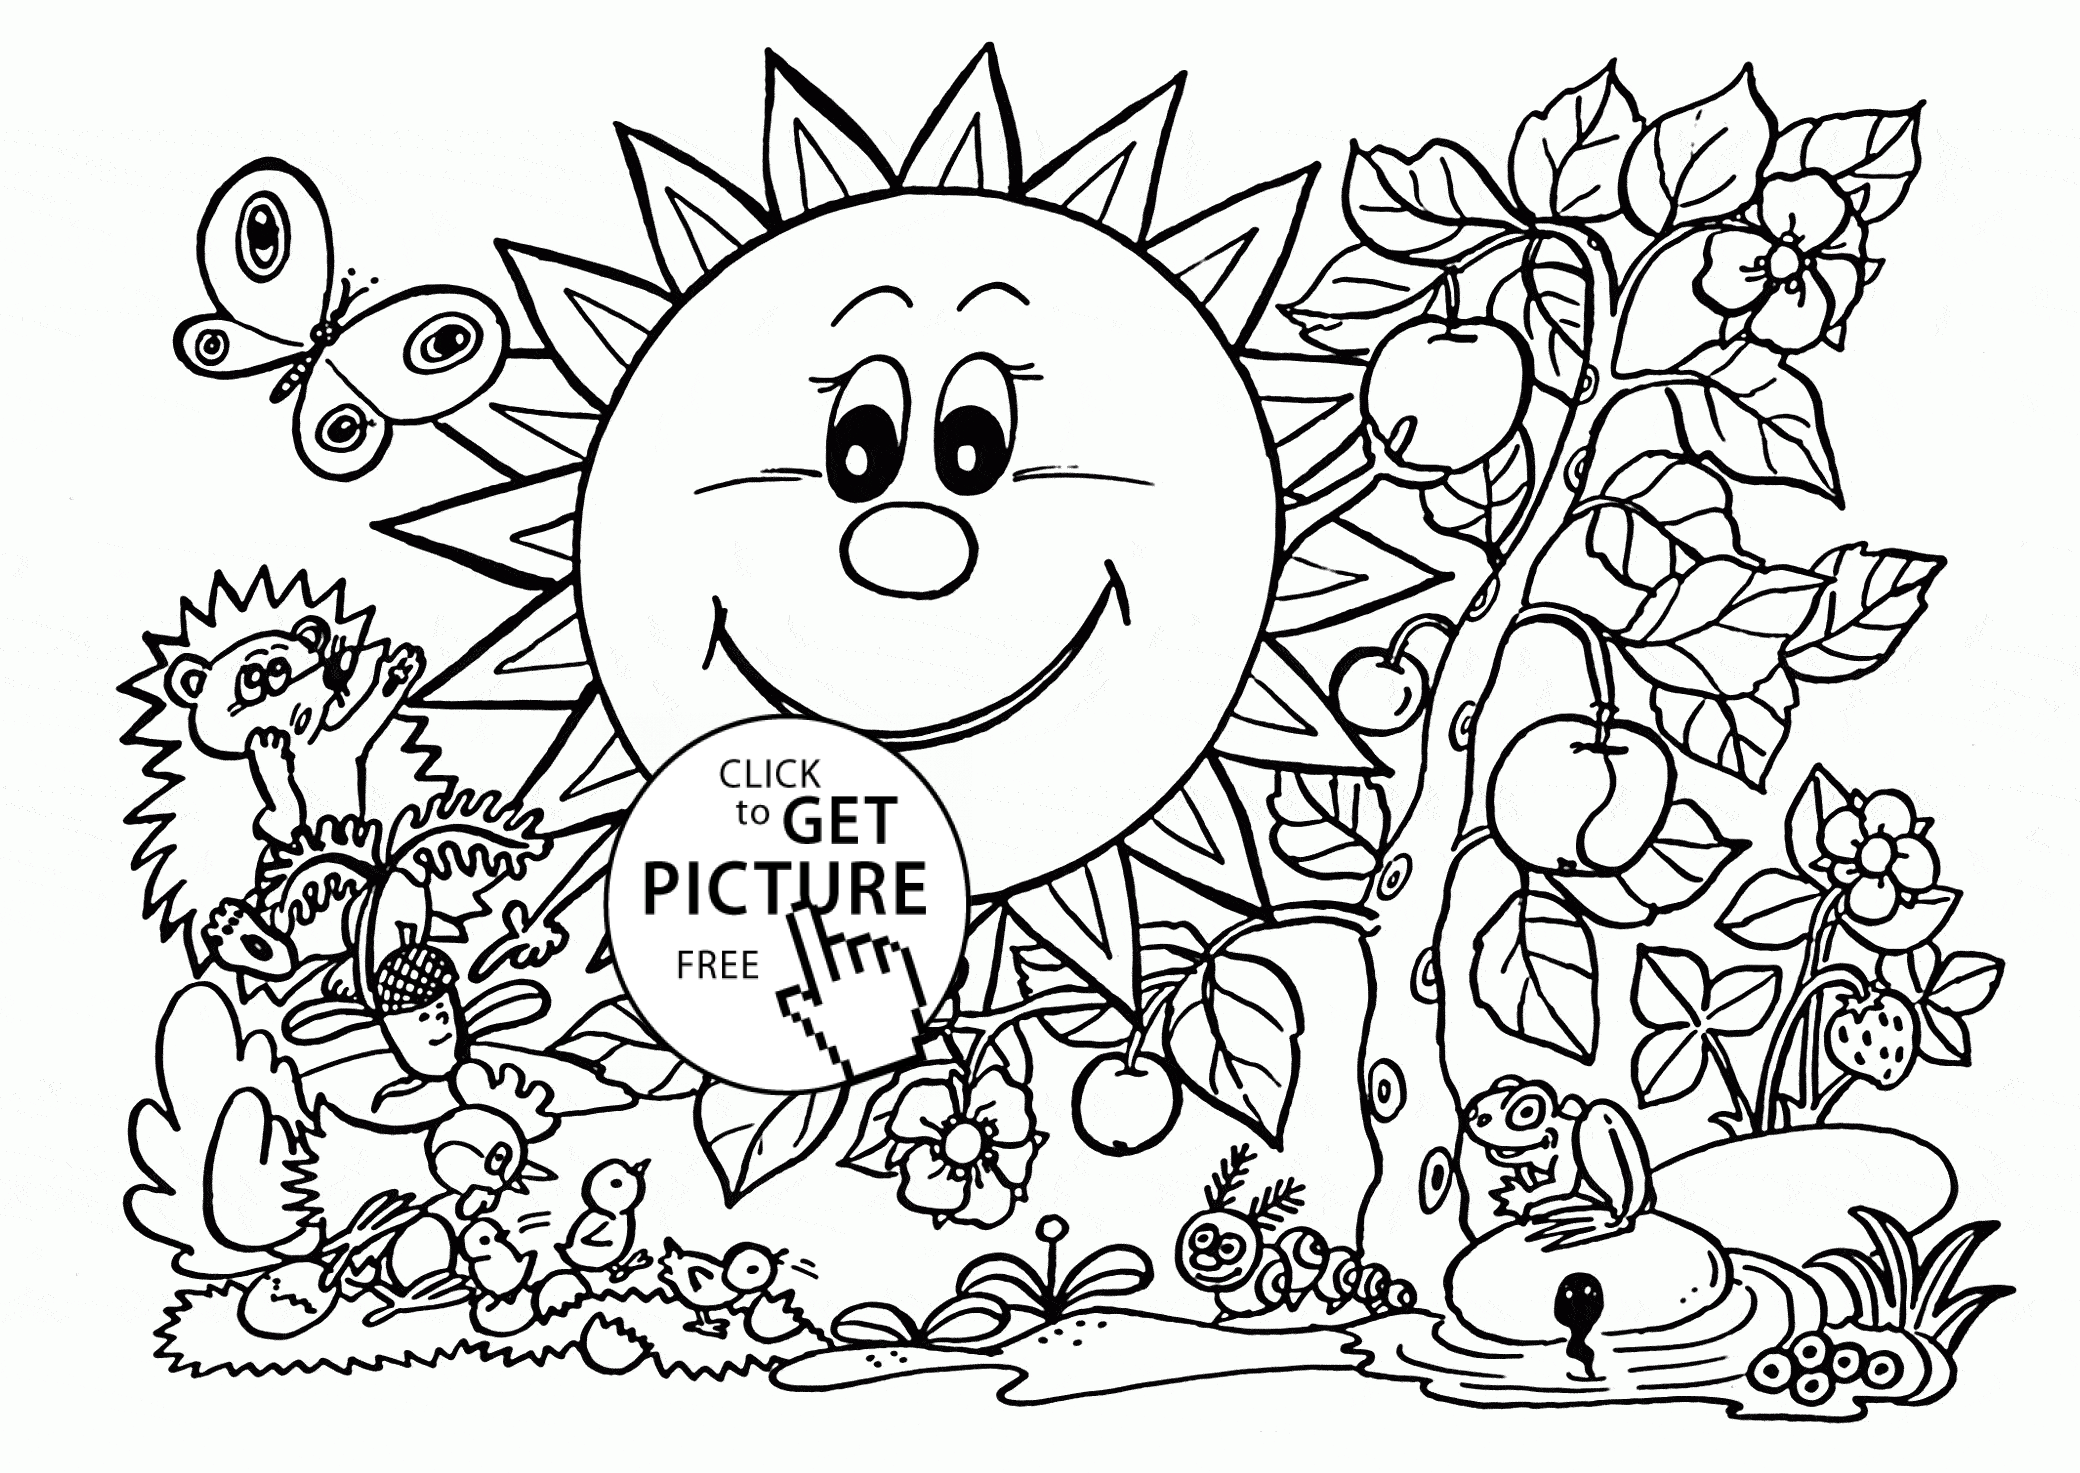 Garden Coloring Page Images For Kids   Coloring Home